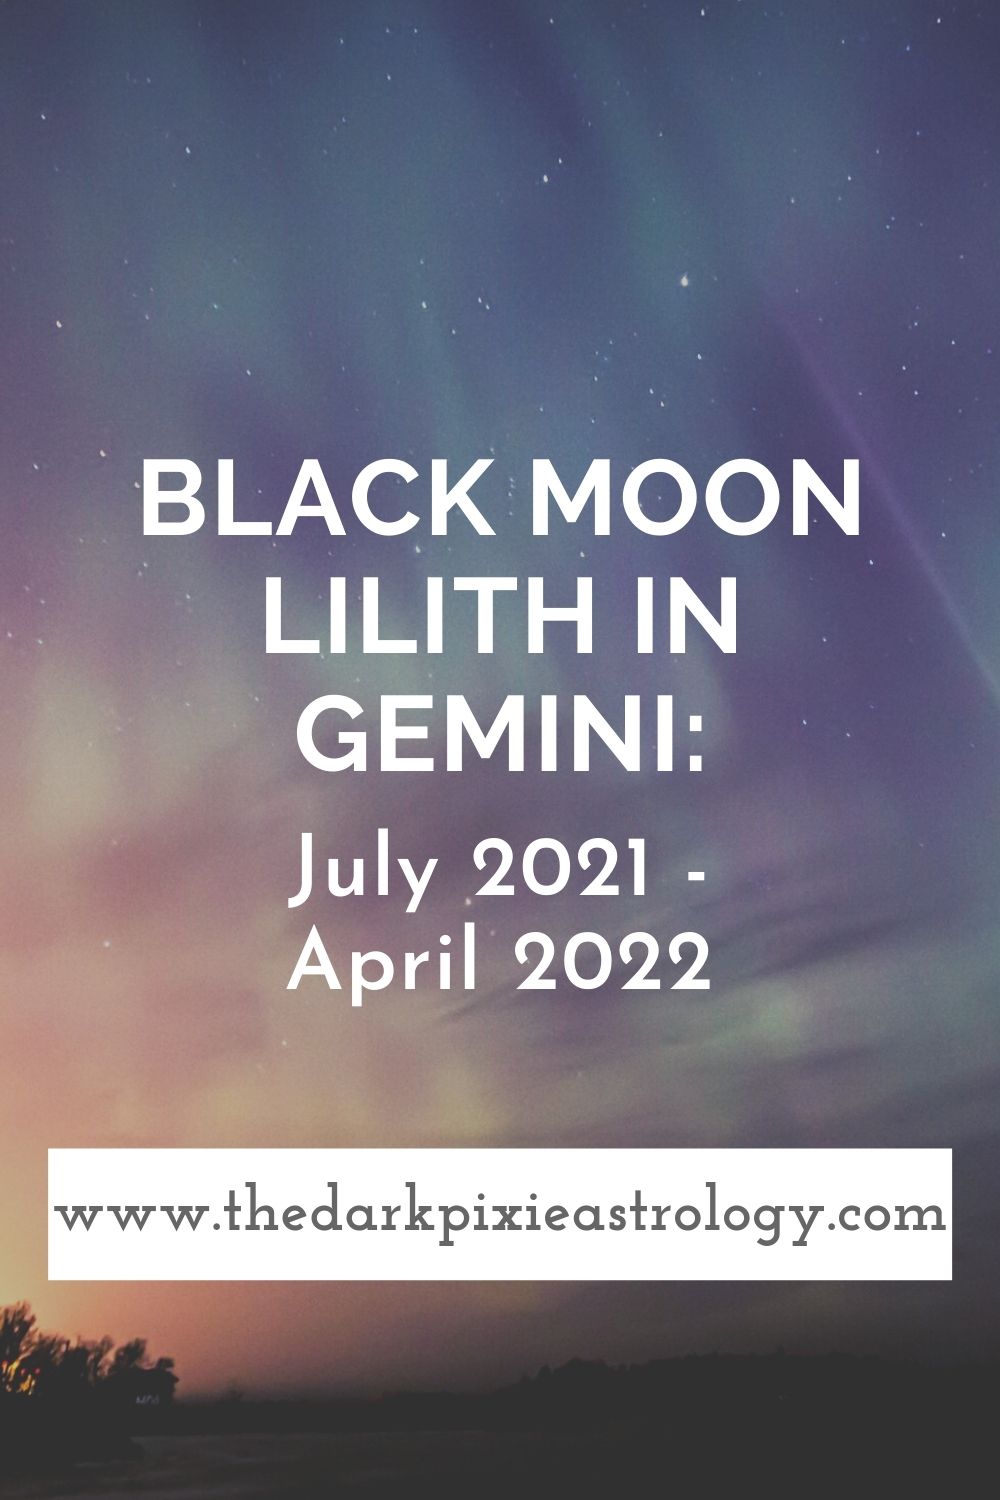 Black Moon Lilith in Gemini: July 2021 - April 2022 - The Dark Pixie Astrology